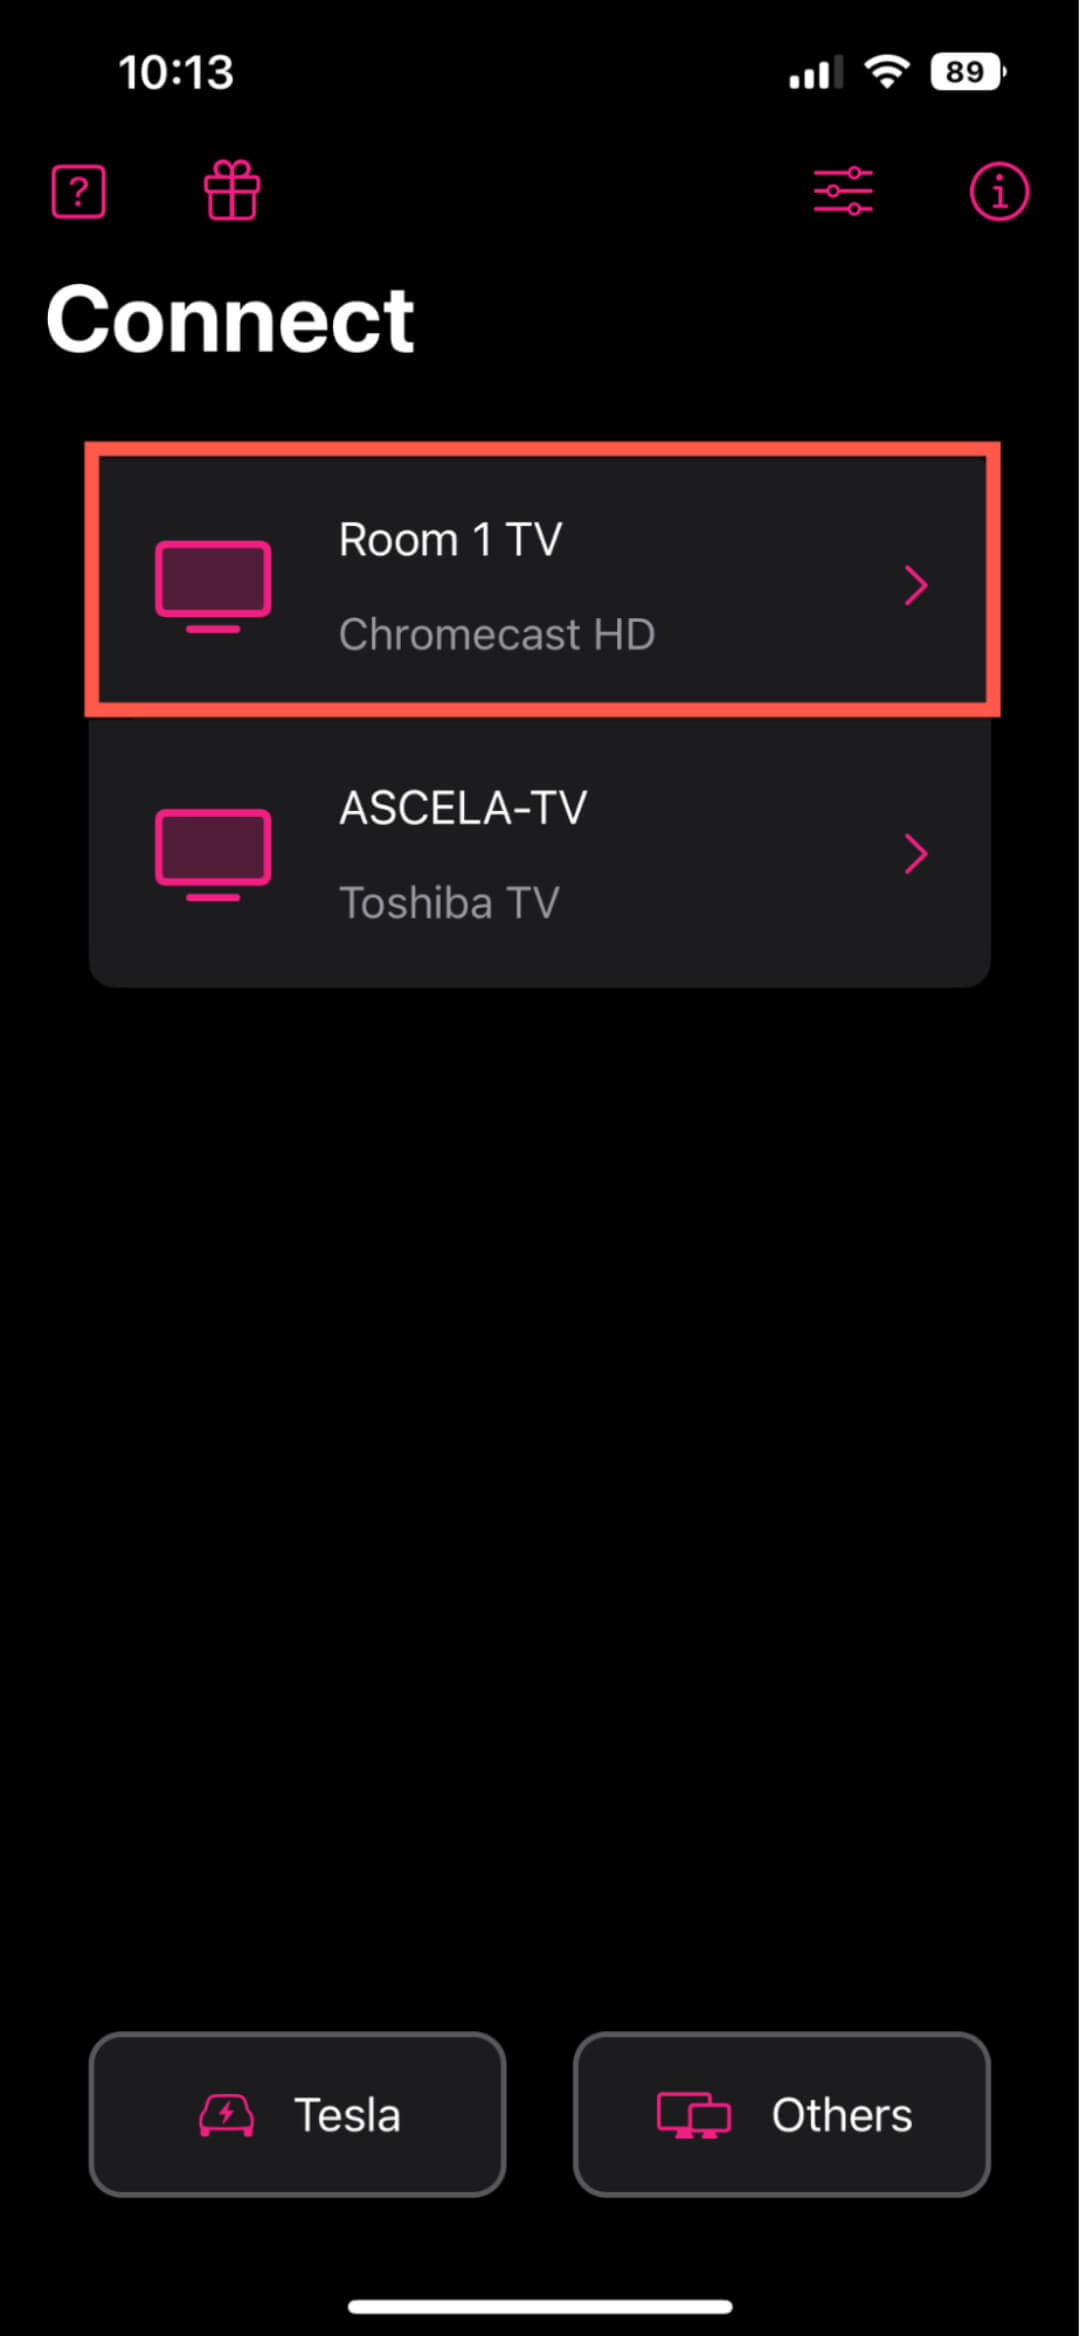 Select your Chromecast device under Connect